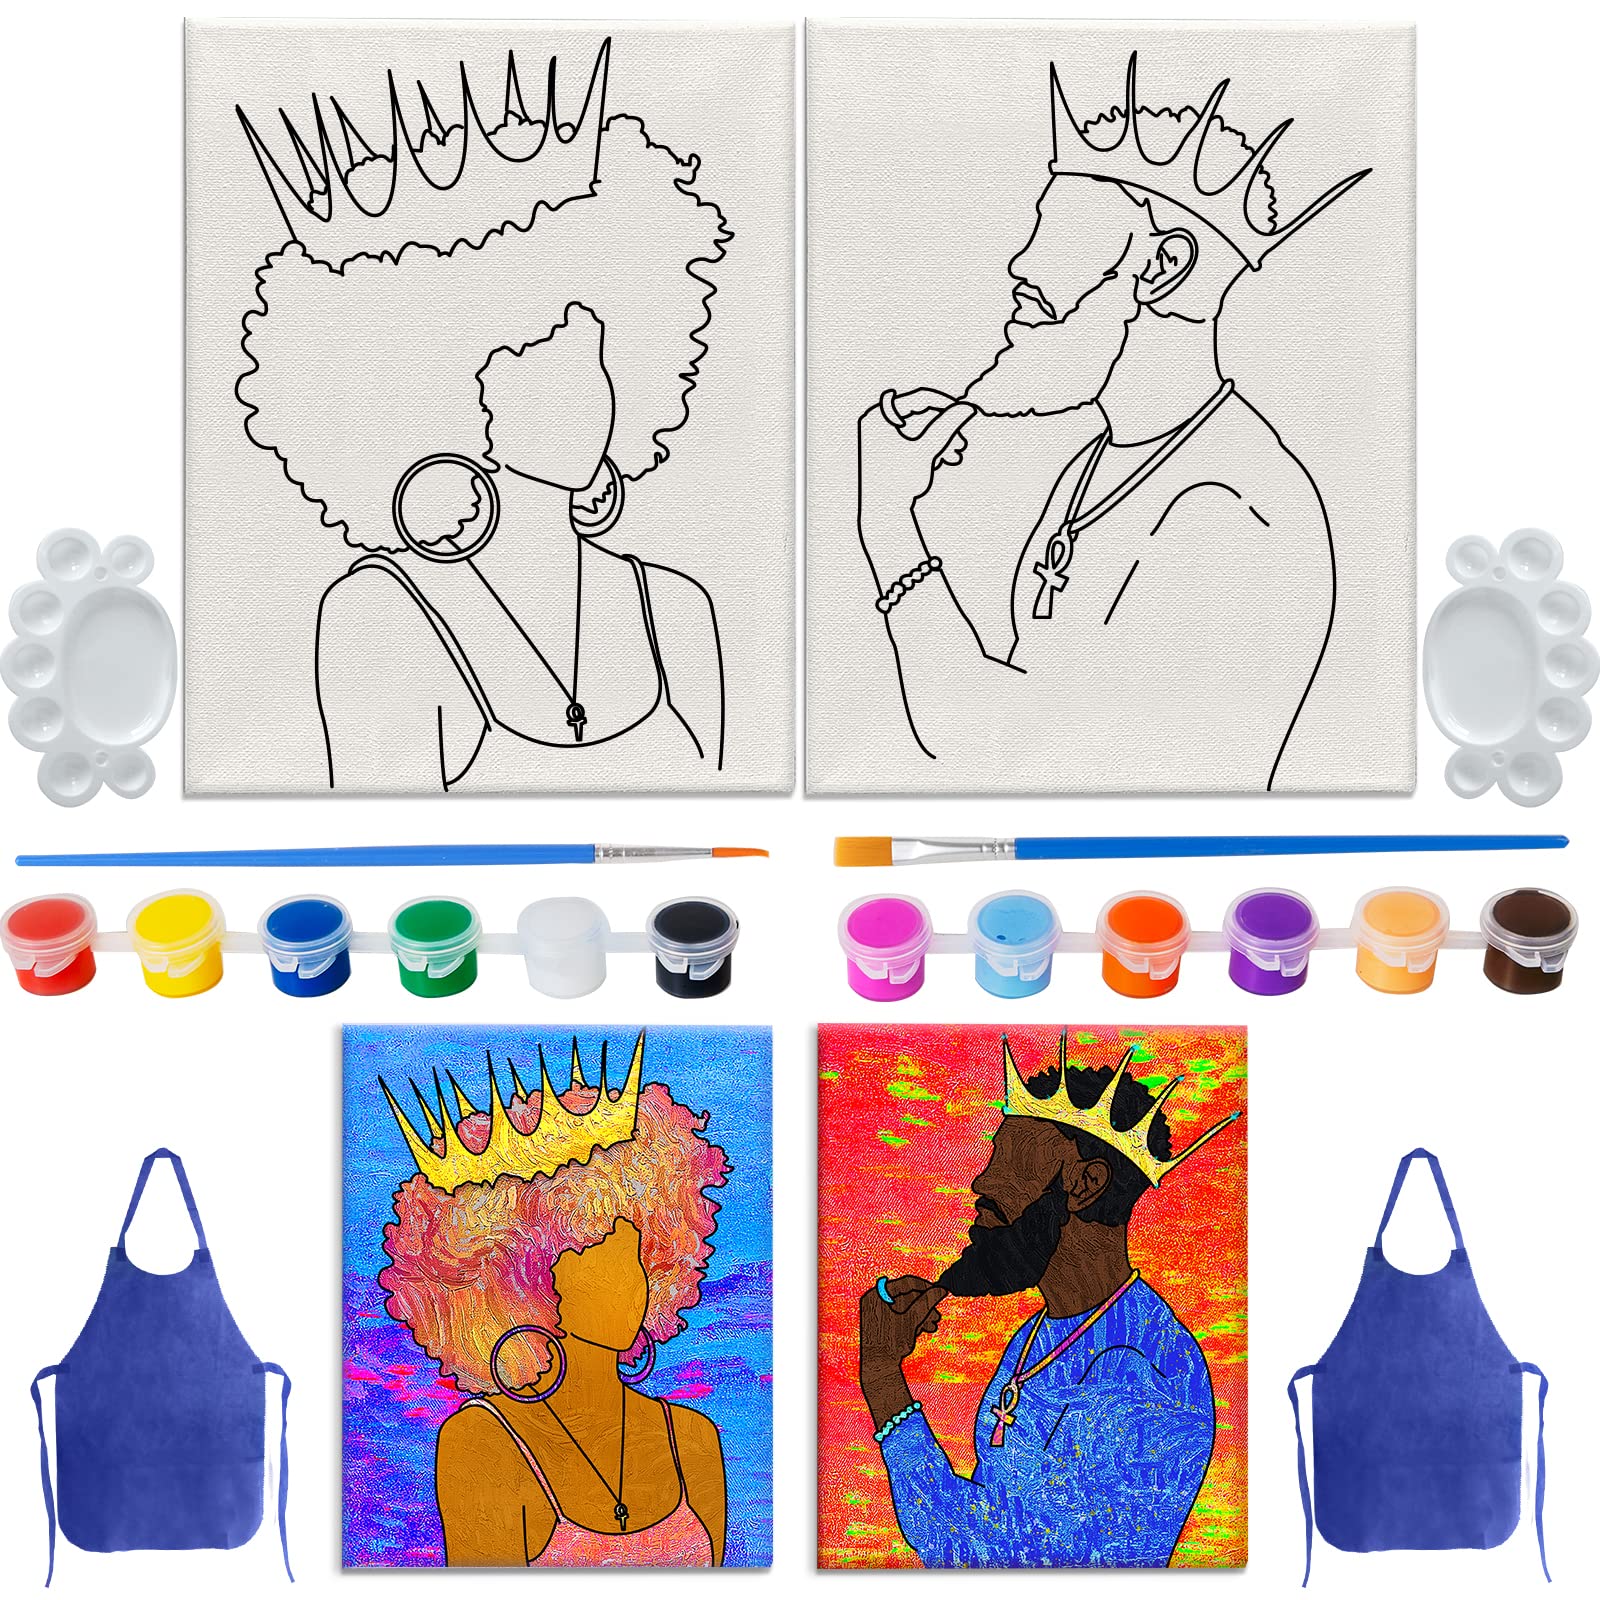  Canvases For Painting 12 Pack,8 X 10 Inch Painting